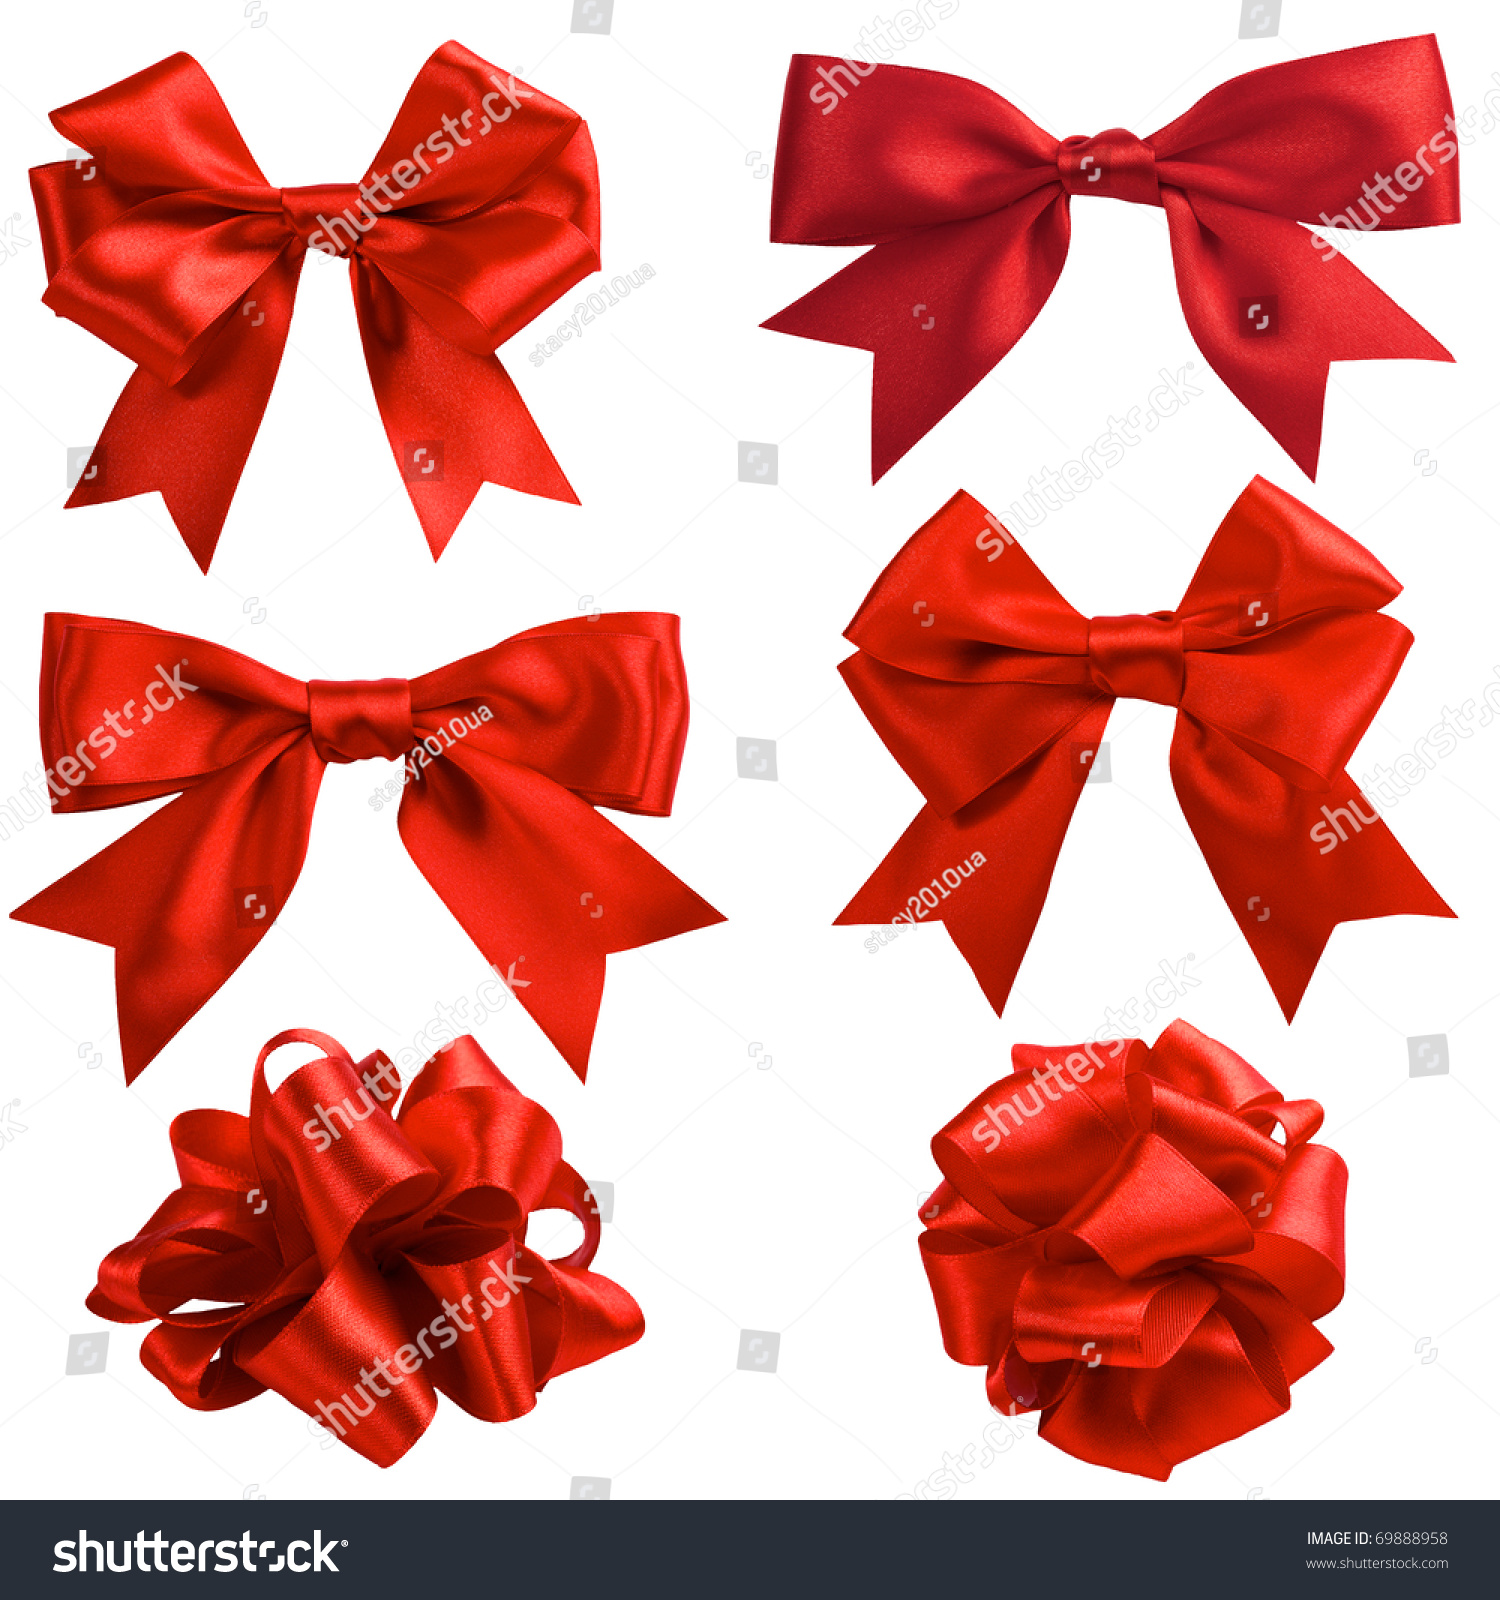 set of six red ribbon satin bows isolated on white #69888958